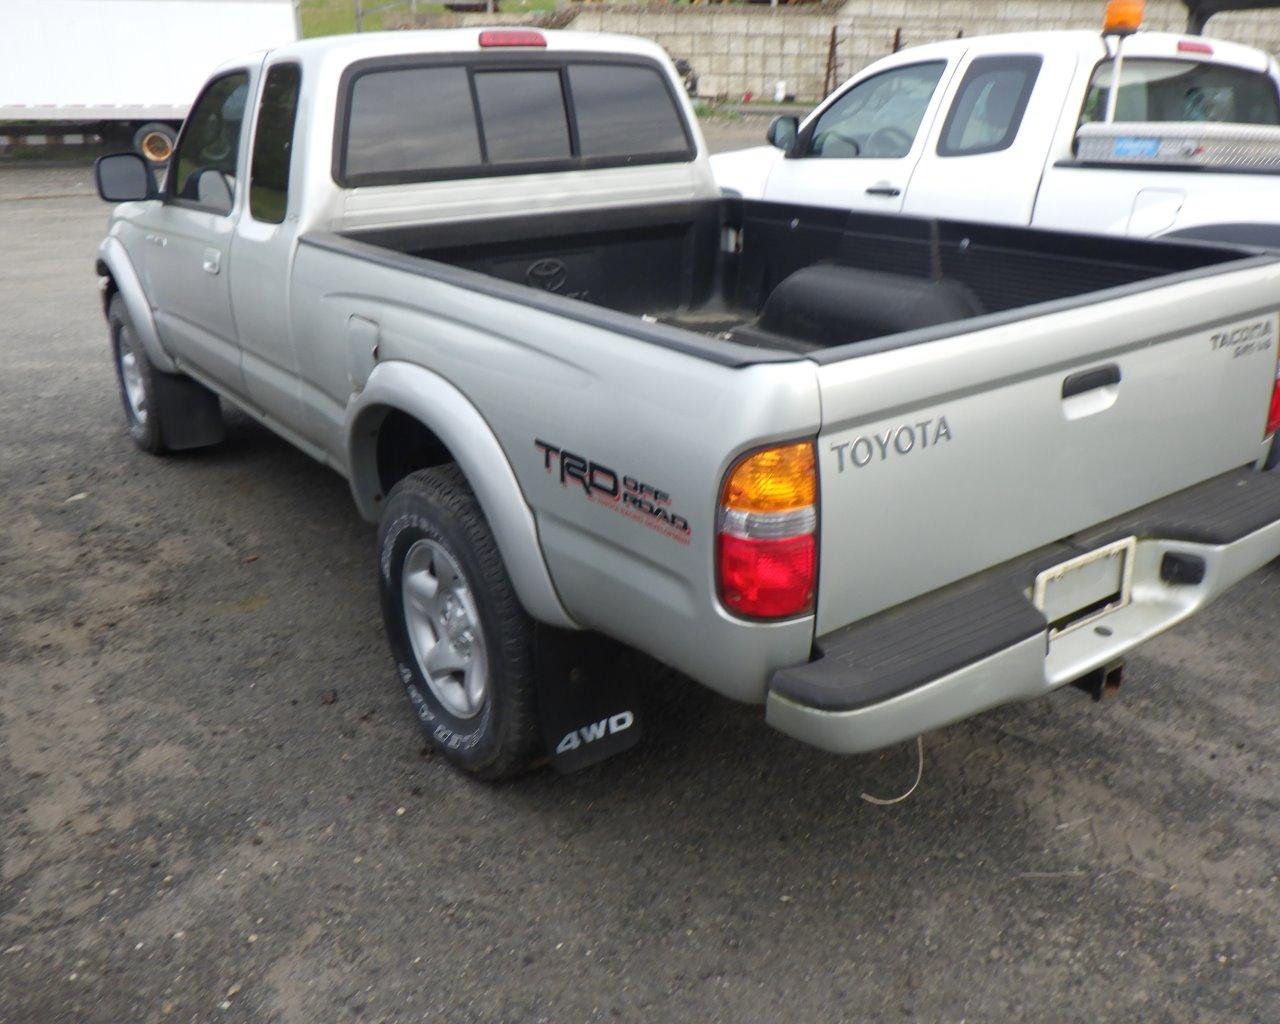 2003 TOYOTA Tacoma Ext Cab   4x4 (DOESN''T START) s/n:27259